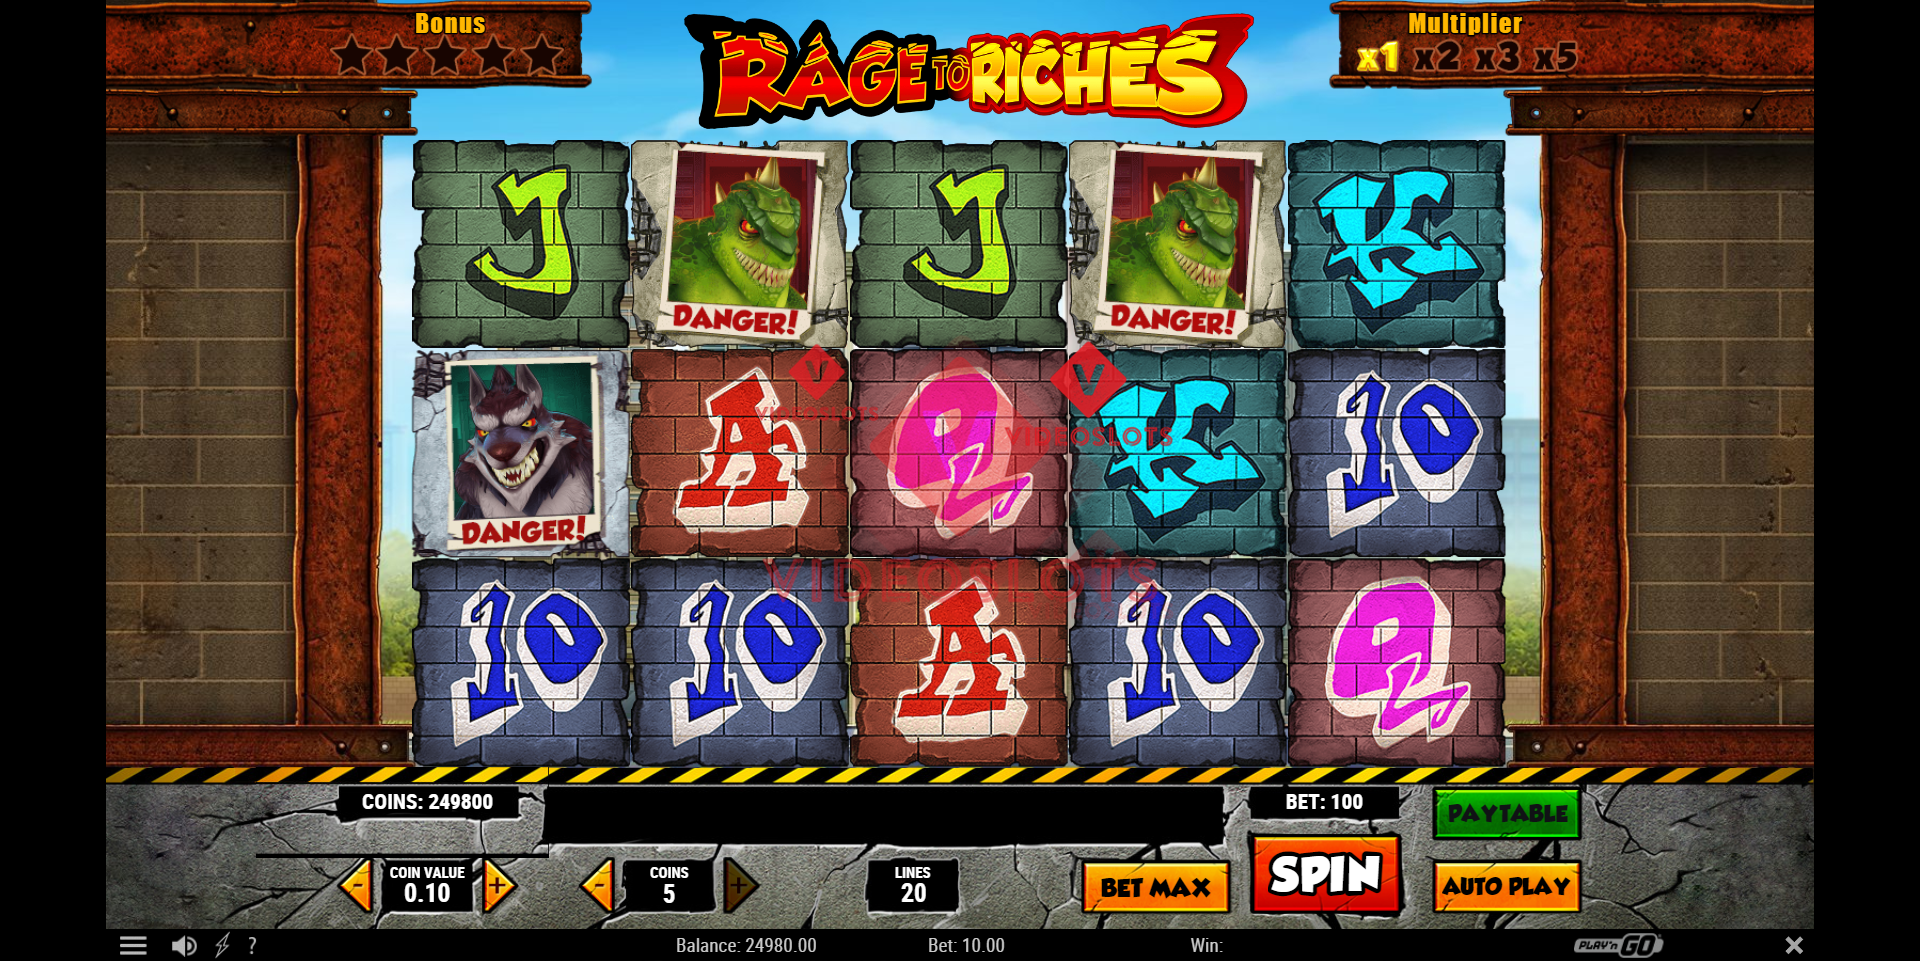 Base Game for Rage to Riches slot from Play'n Go